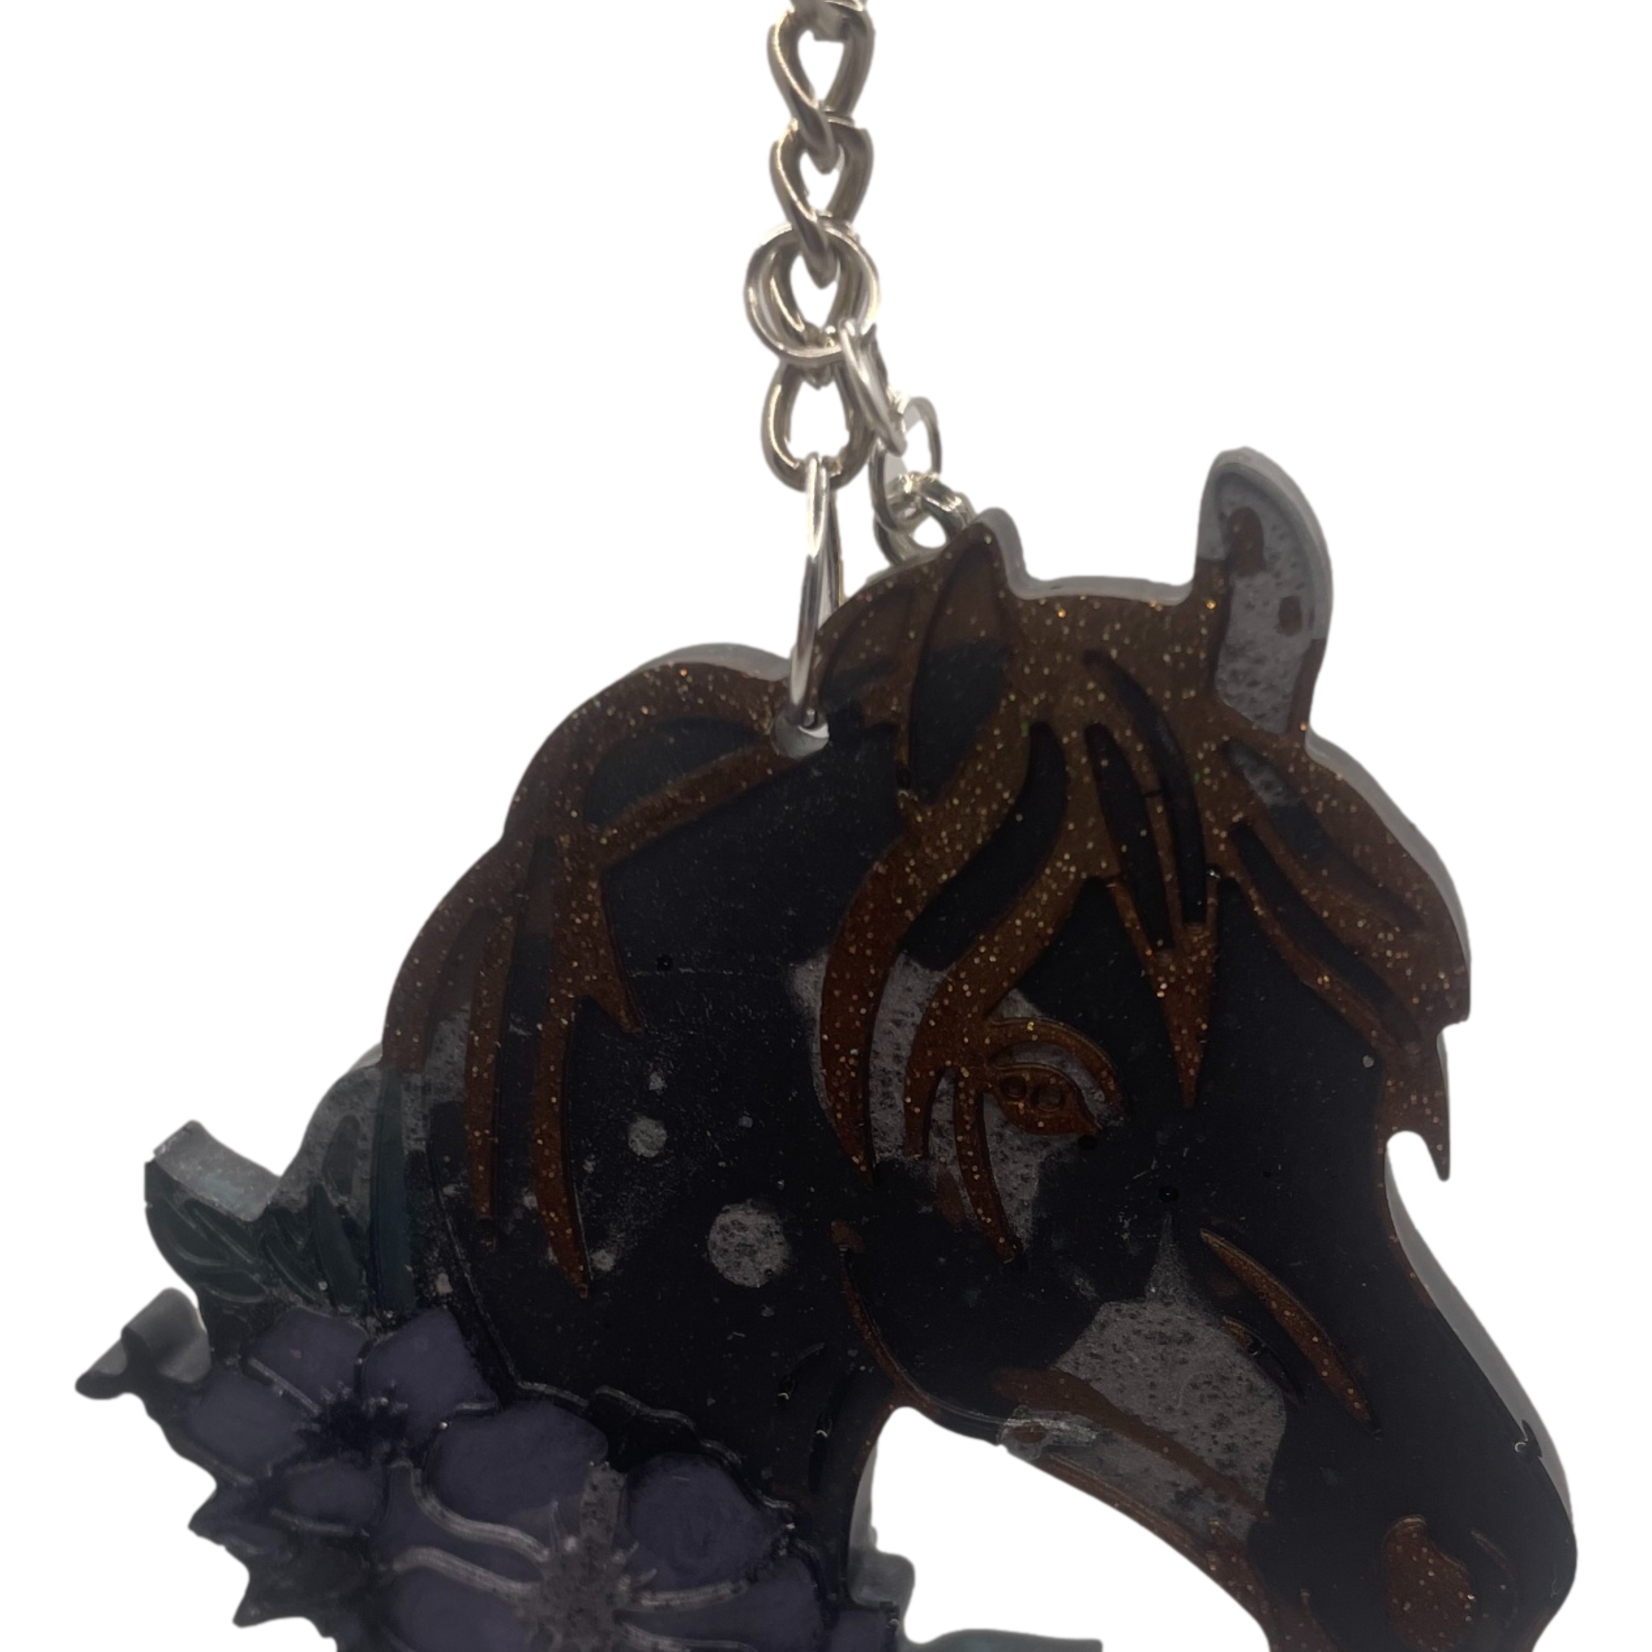 East Coast Sirens Black & Brown Horse with Flowers Keychain